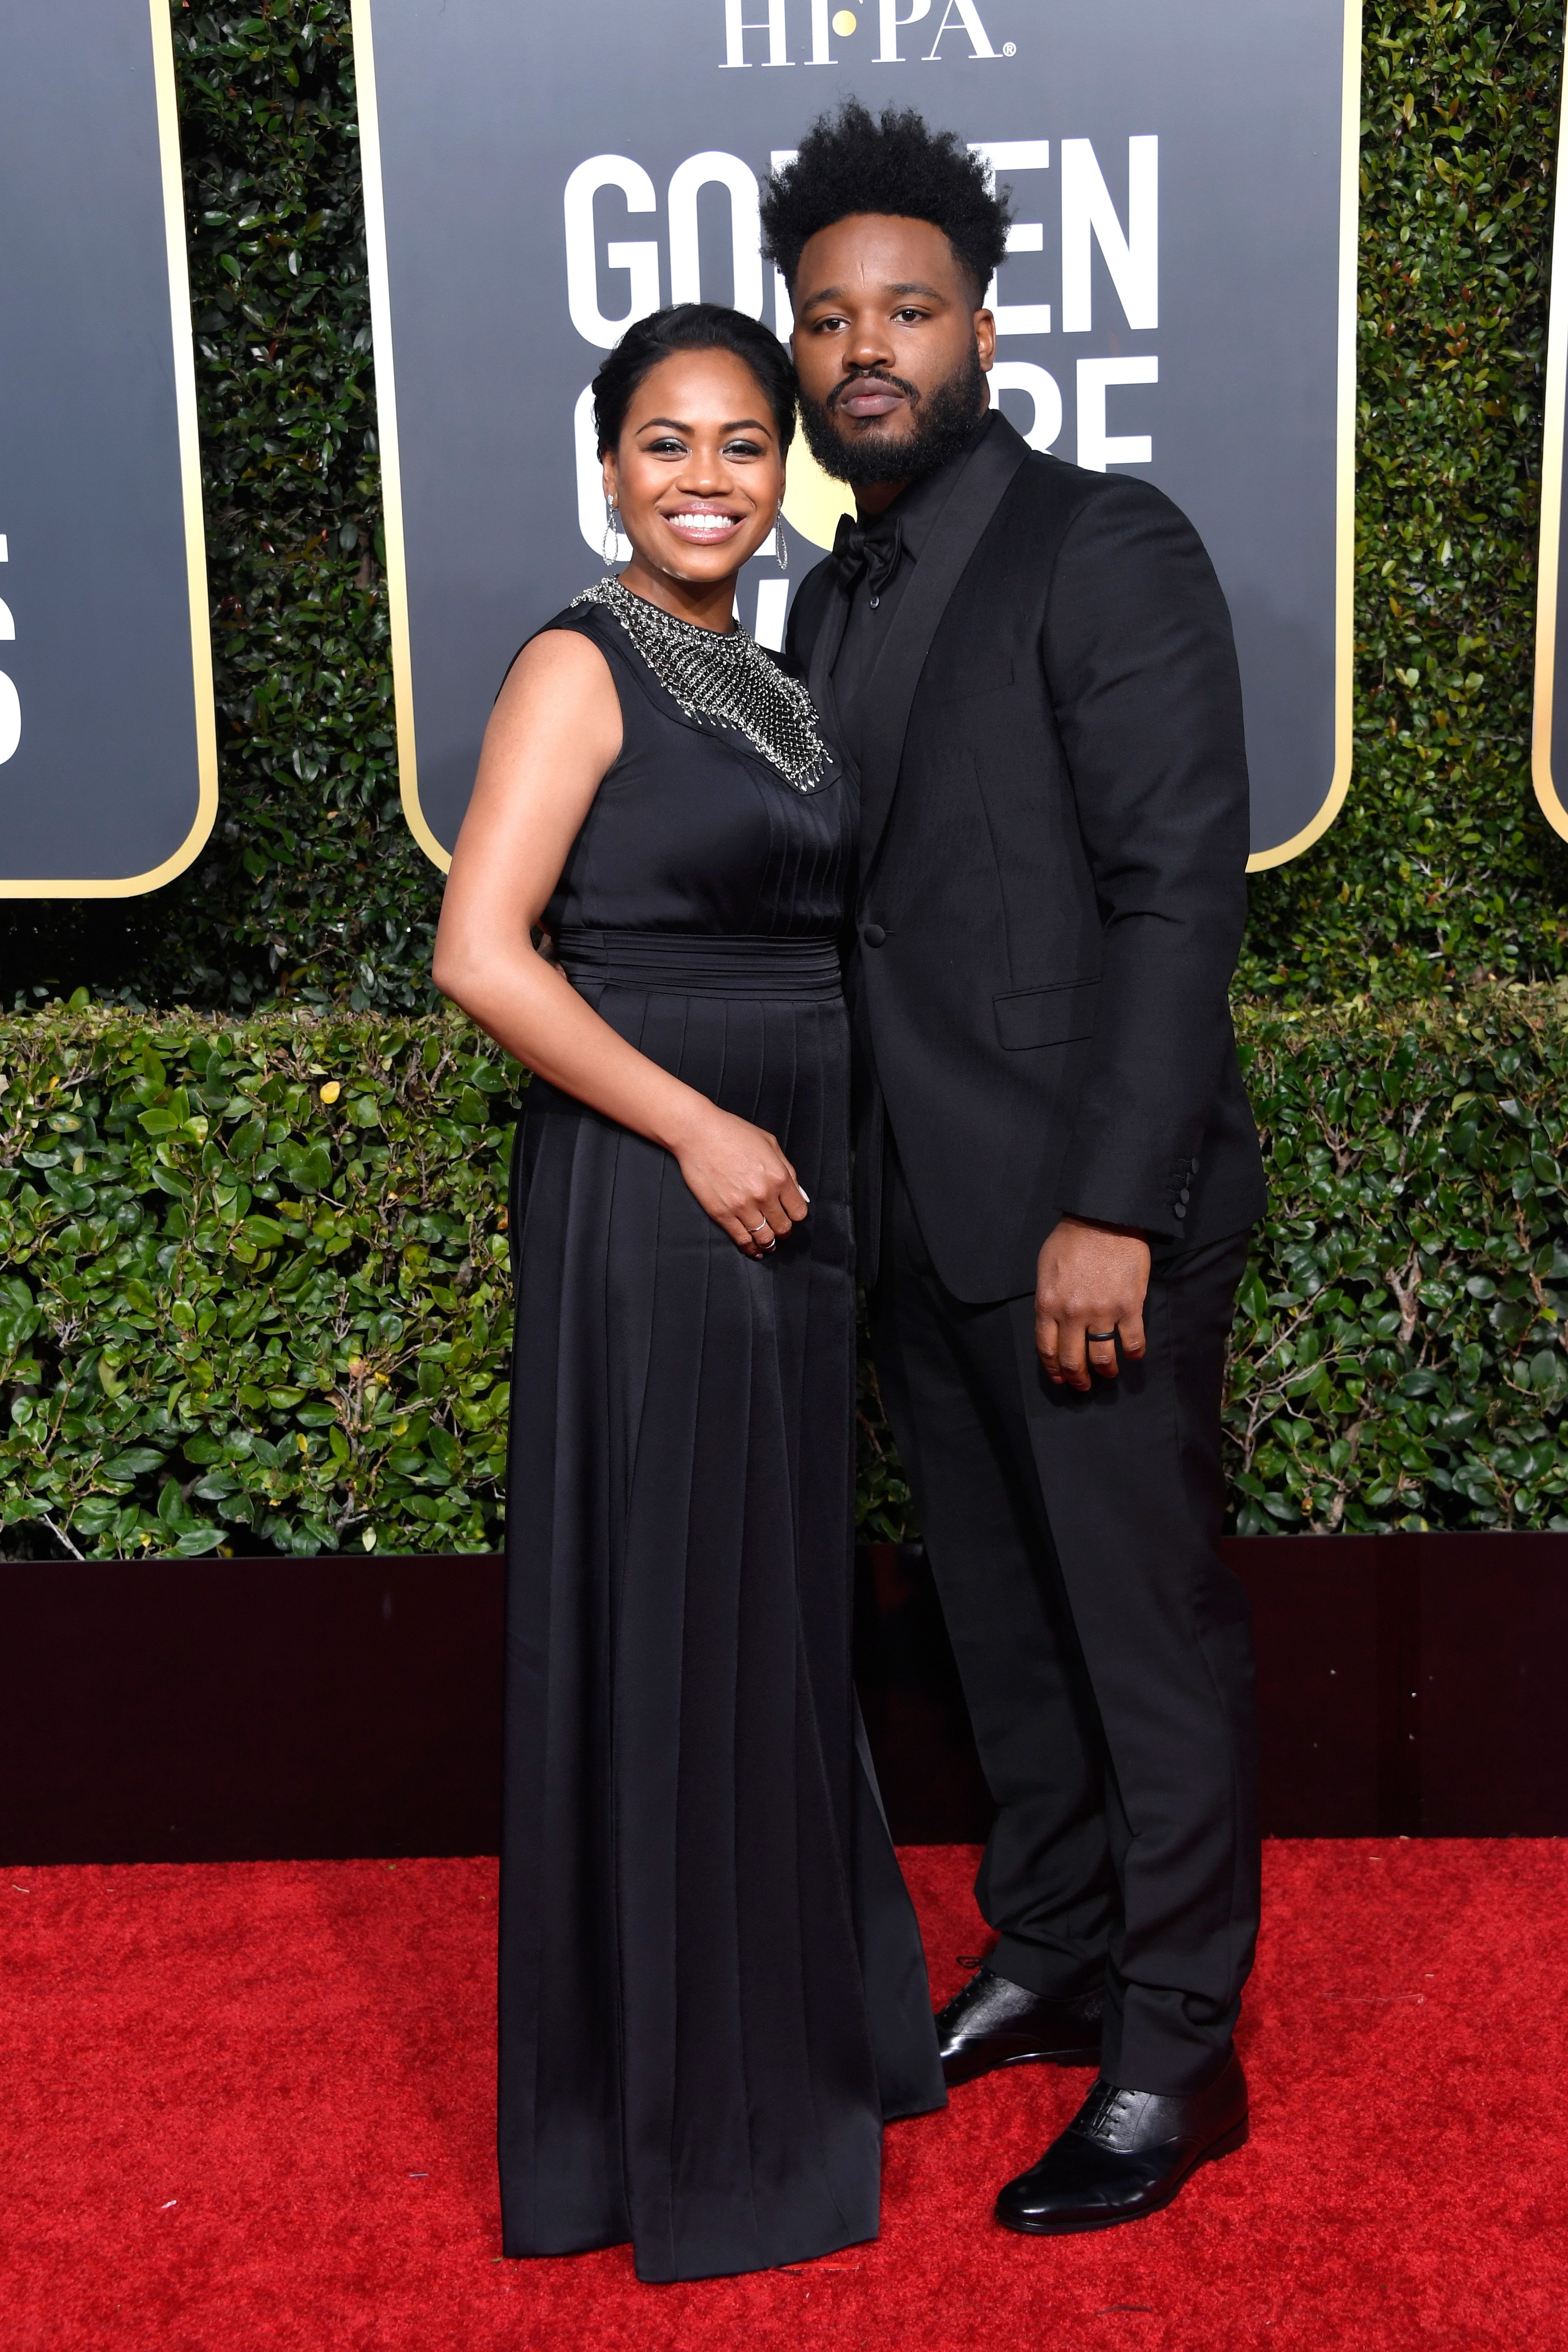 Zinzi Evans and Ryan Coogler attend the 76th Annual Golden Globe Awards at The Beverly Hilton Hotel on January 6, 2019, in Beverly Hills, California. | Source: Getty Images